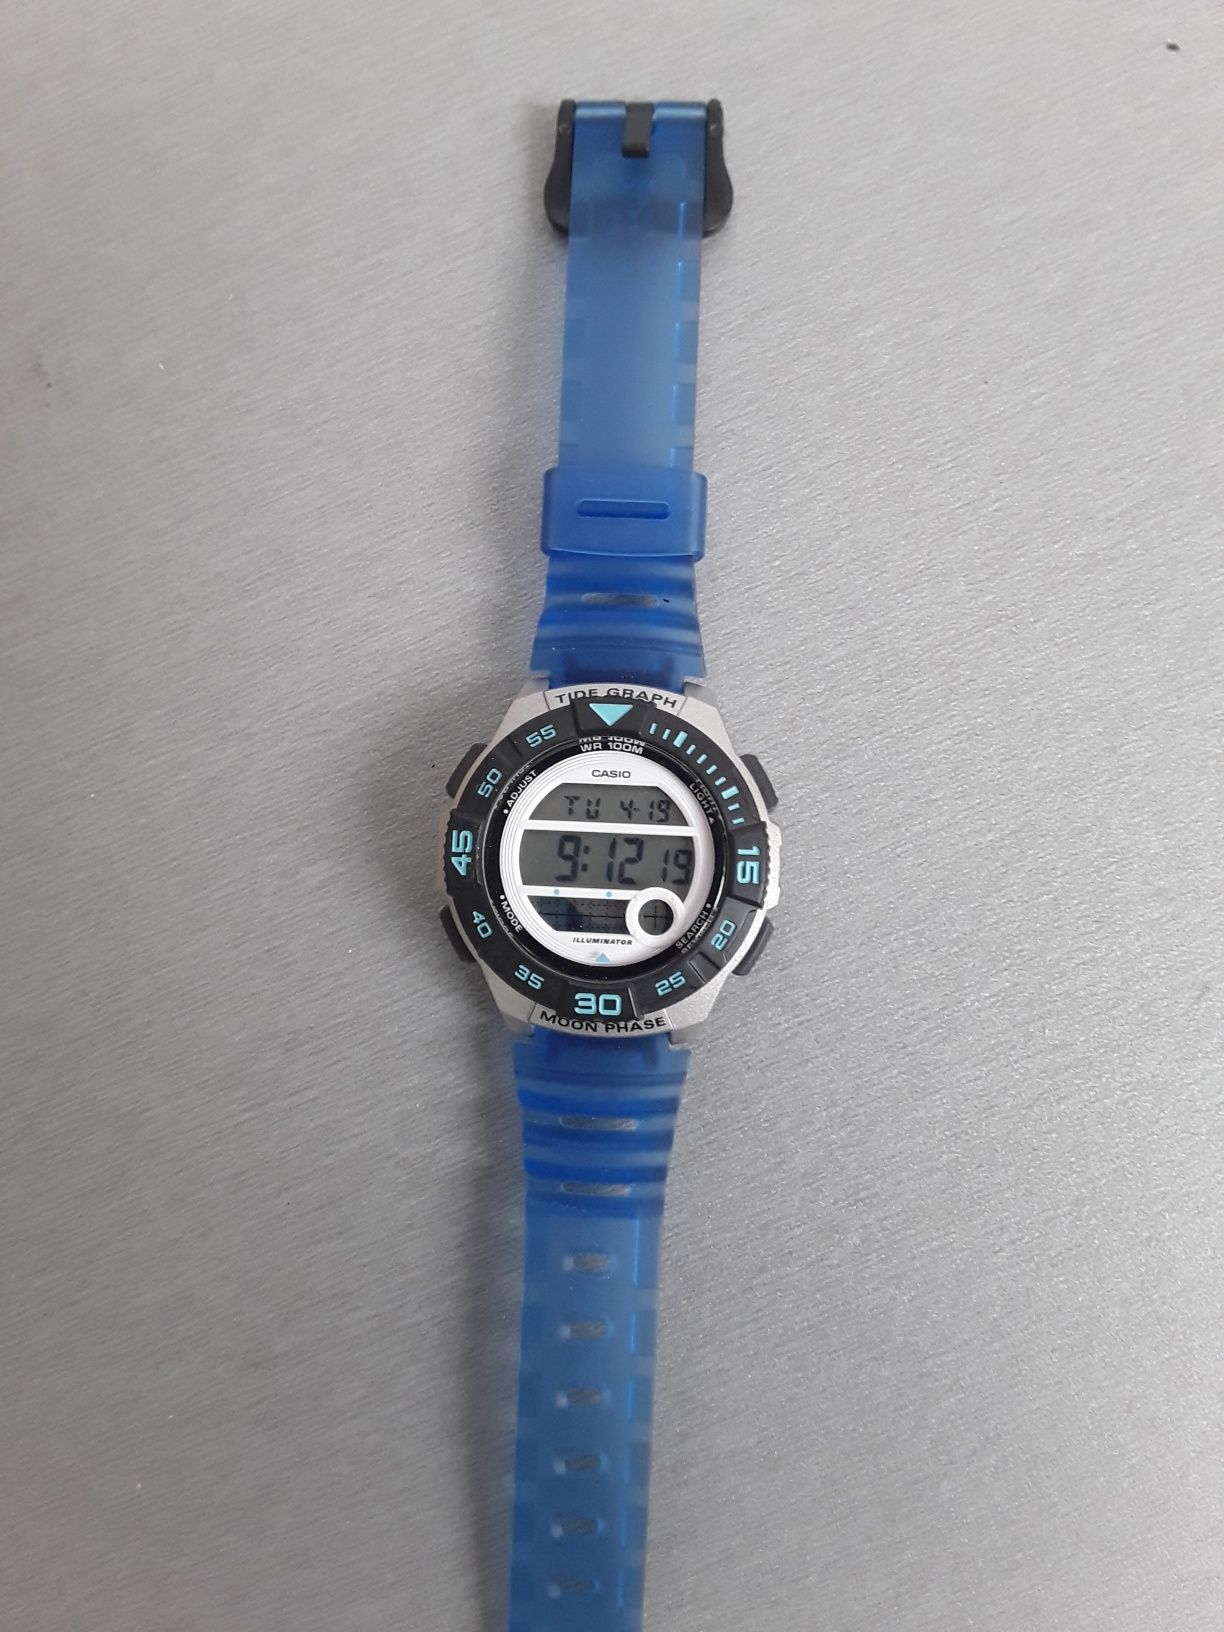 Casio tide graph moon phase